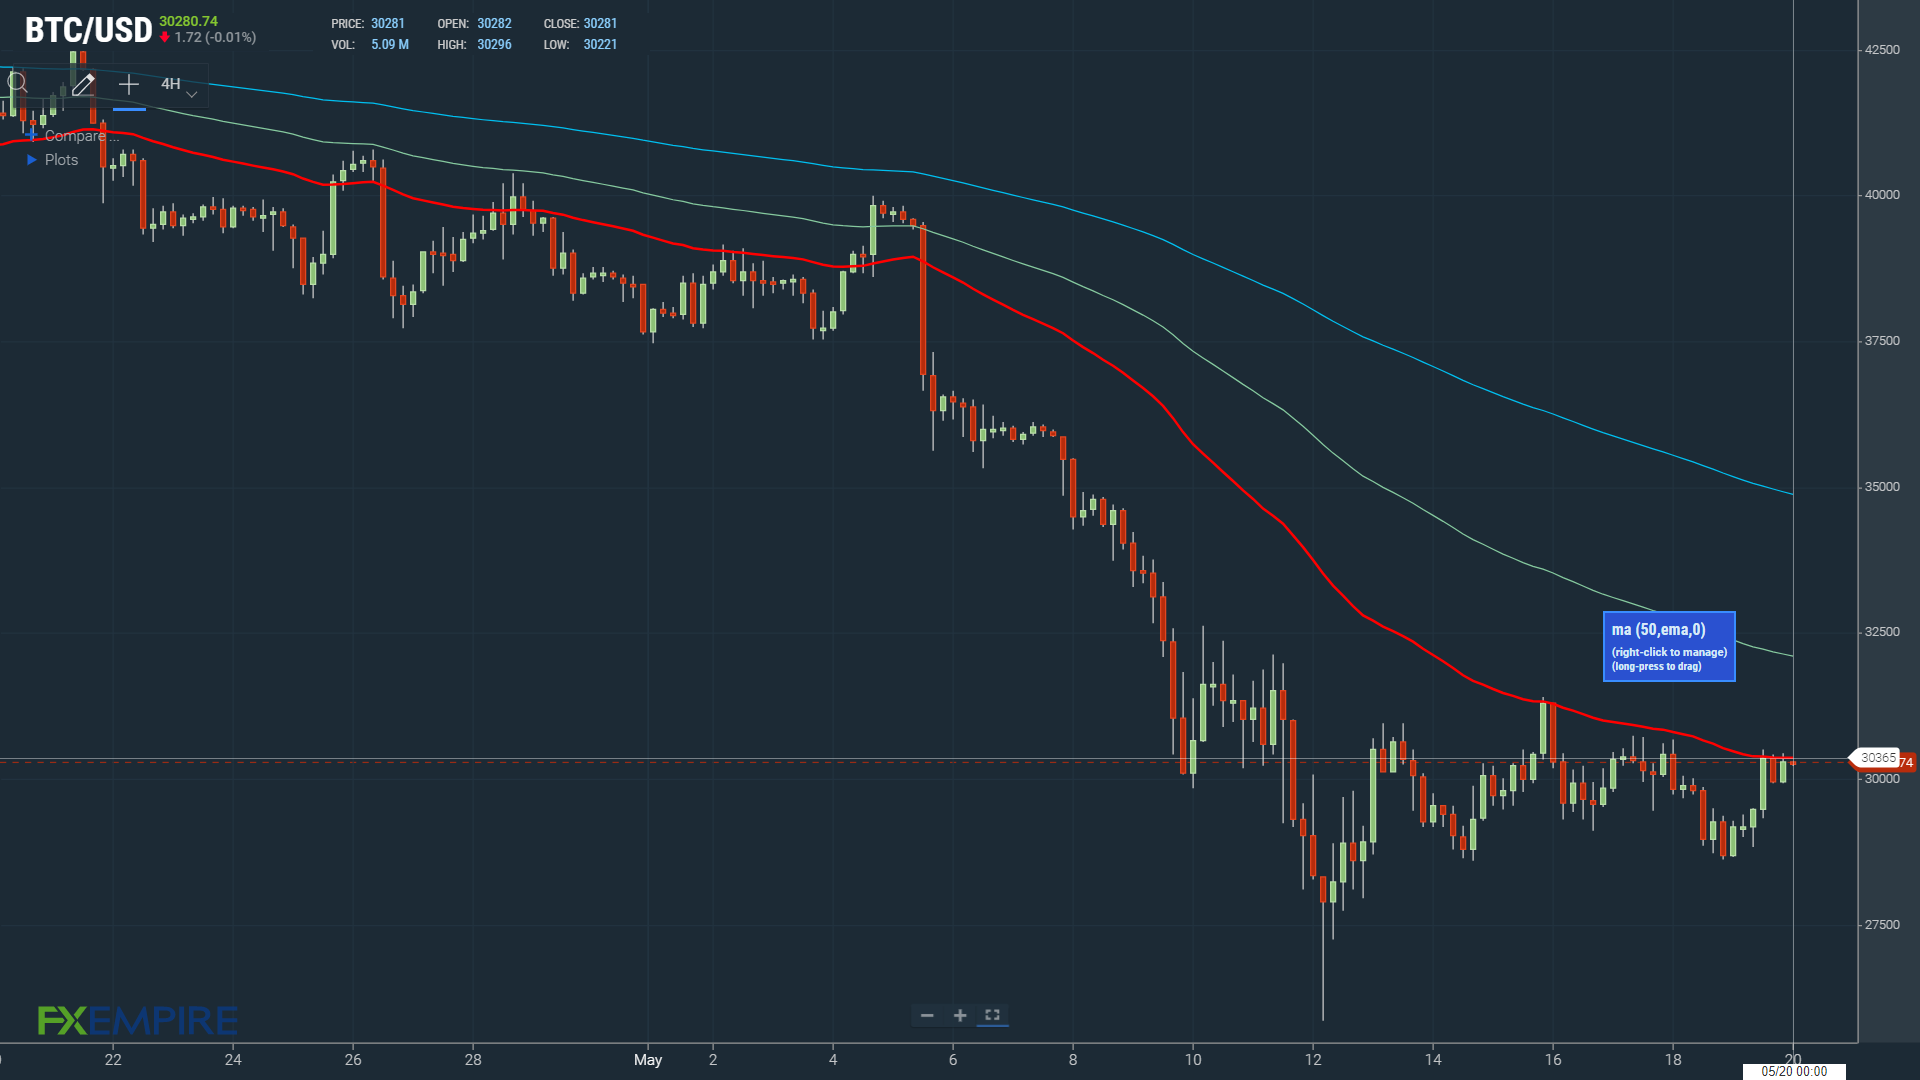 A BTC move through the 50-day EMA would bring $32,000 into play.